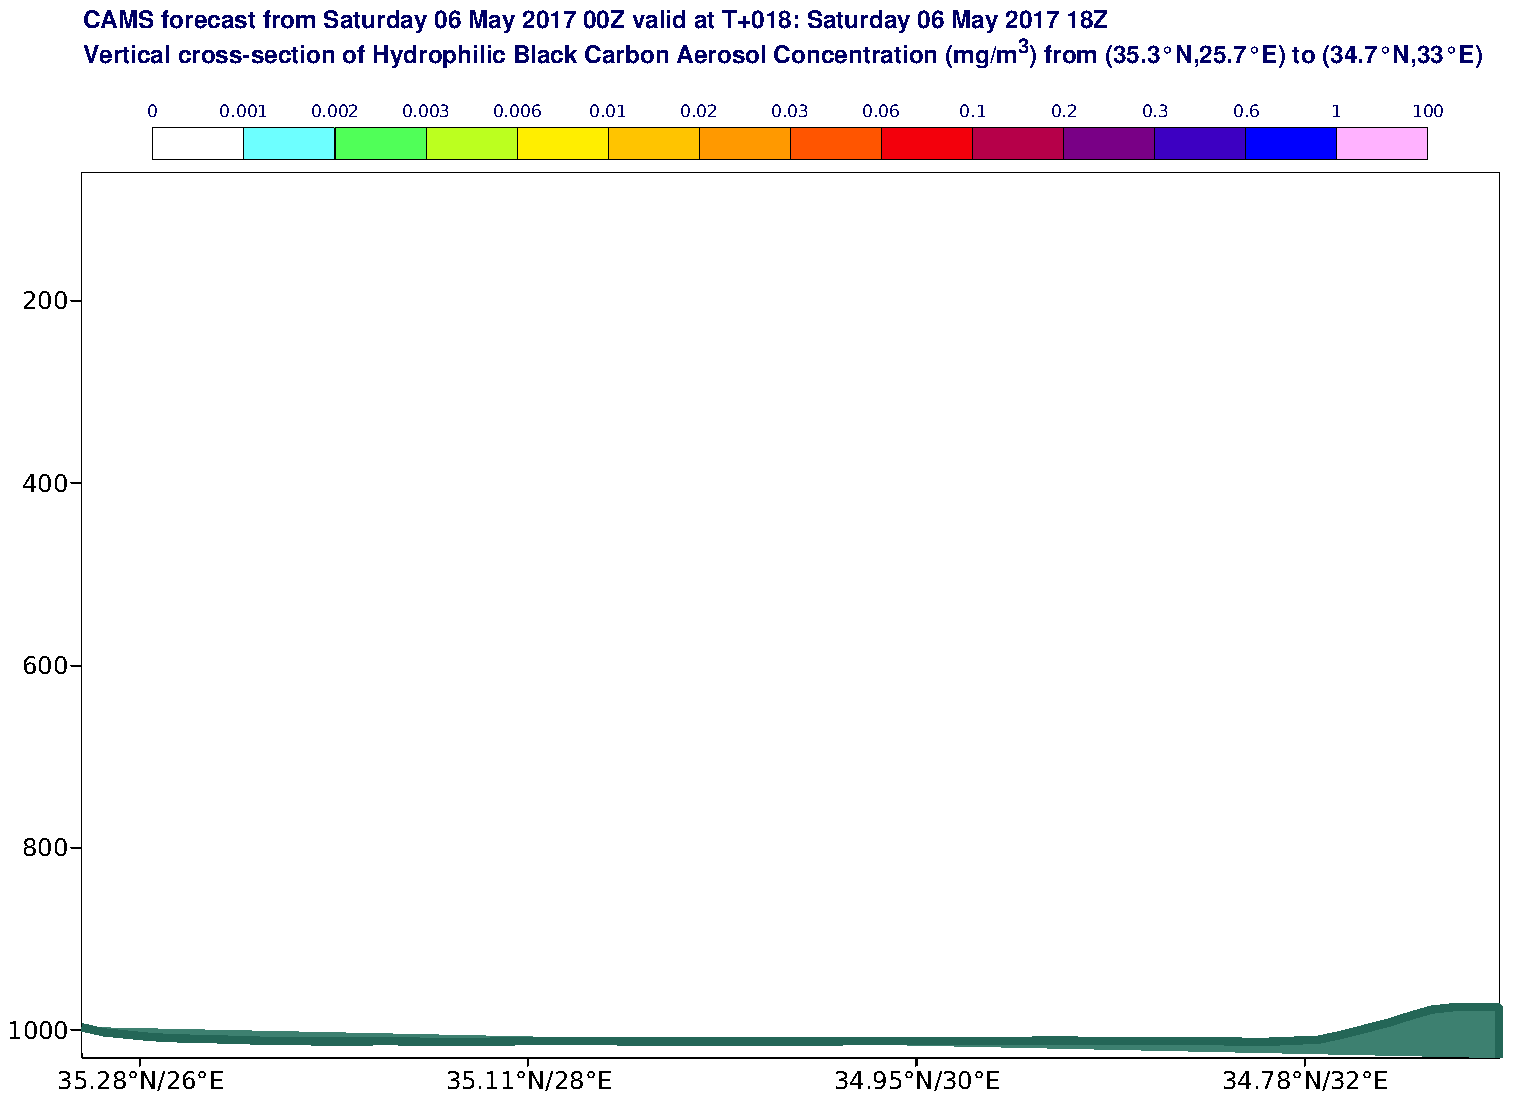 Vertical cross-section of Hydrophilic Black Carbon Aerosol Concentration (mg/m3) valid at T18 - 2017-05-06 18:00